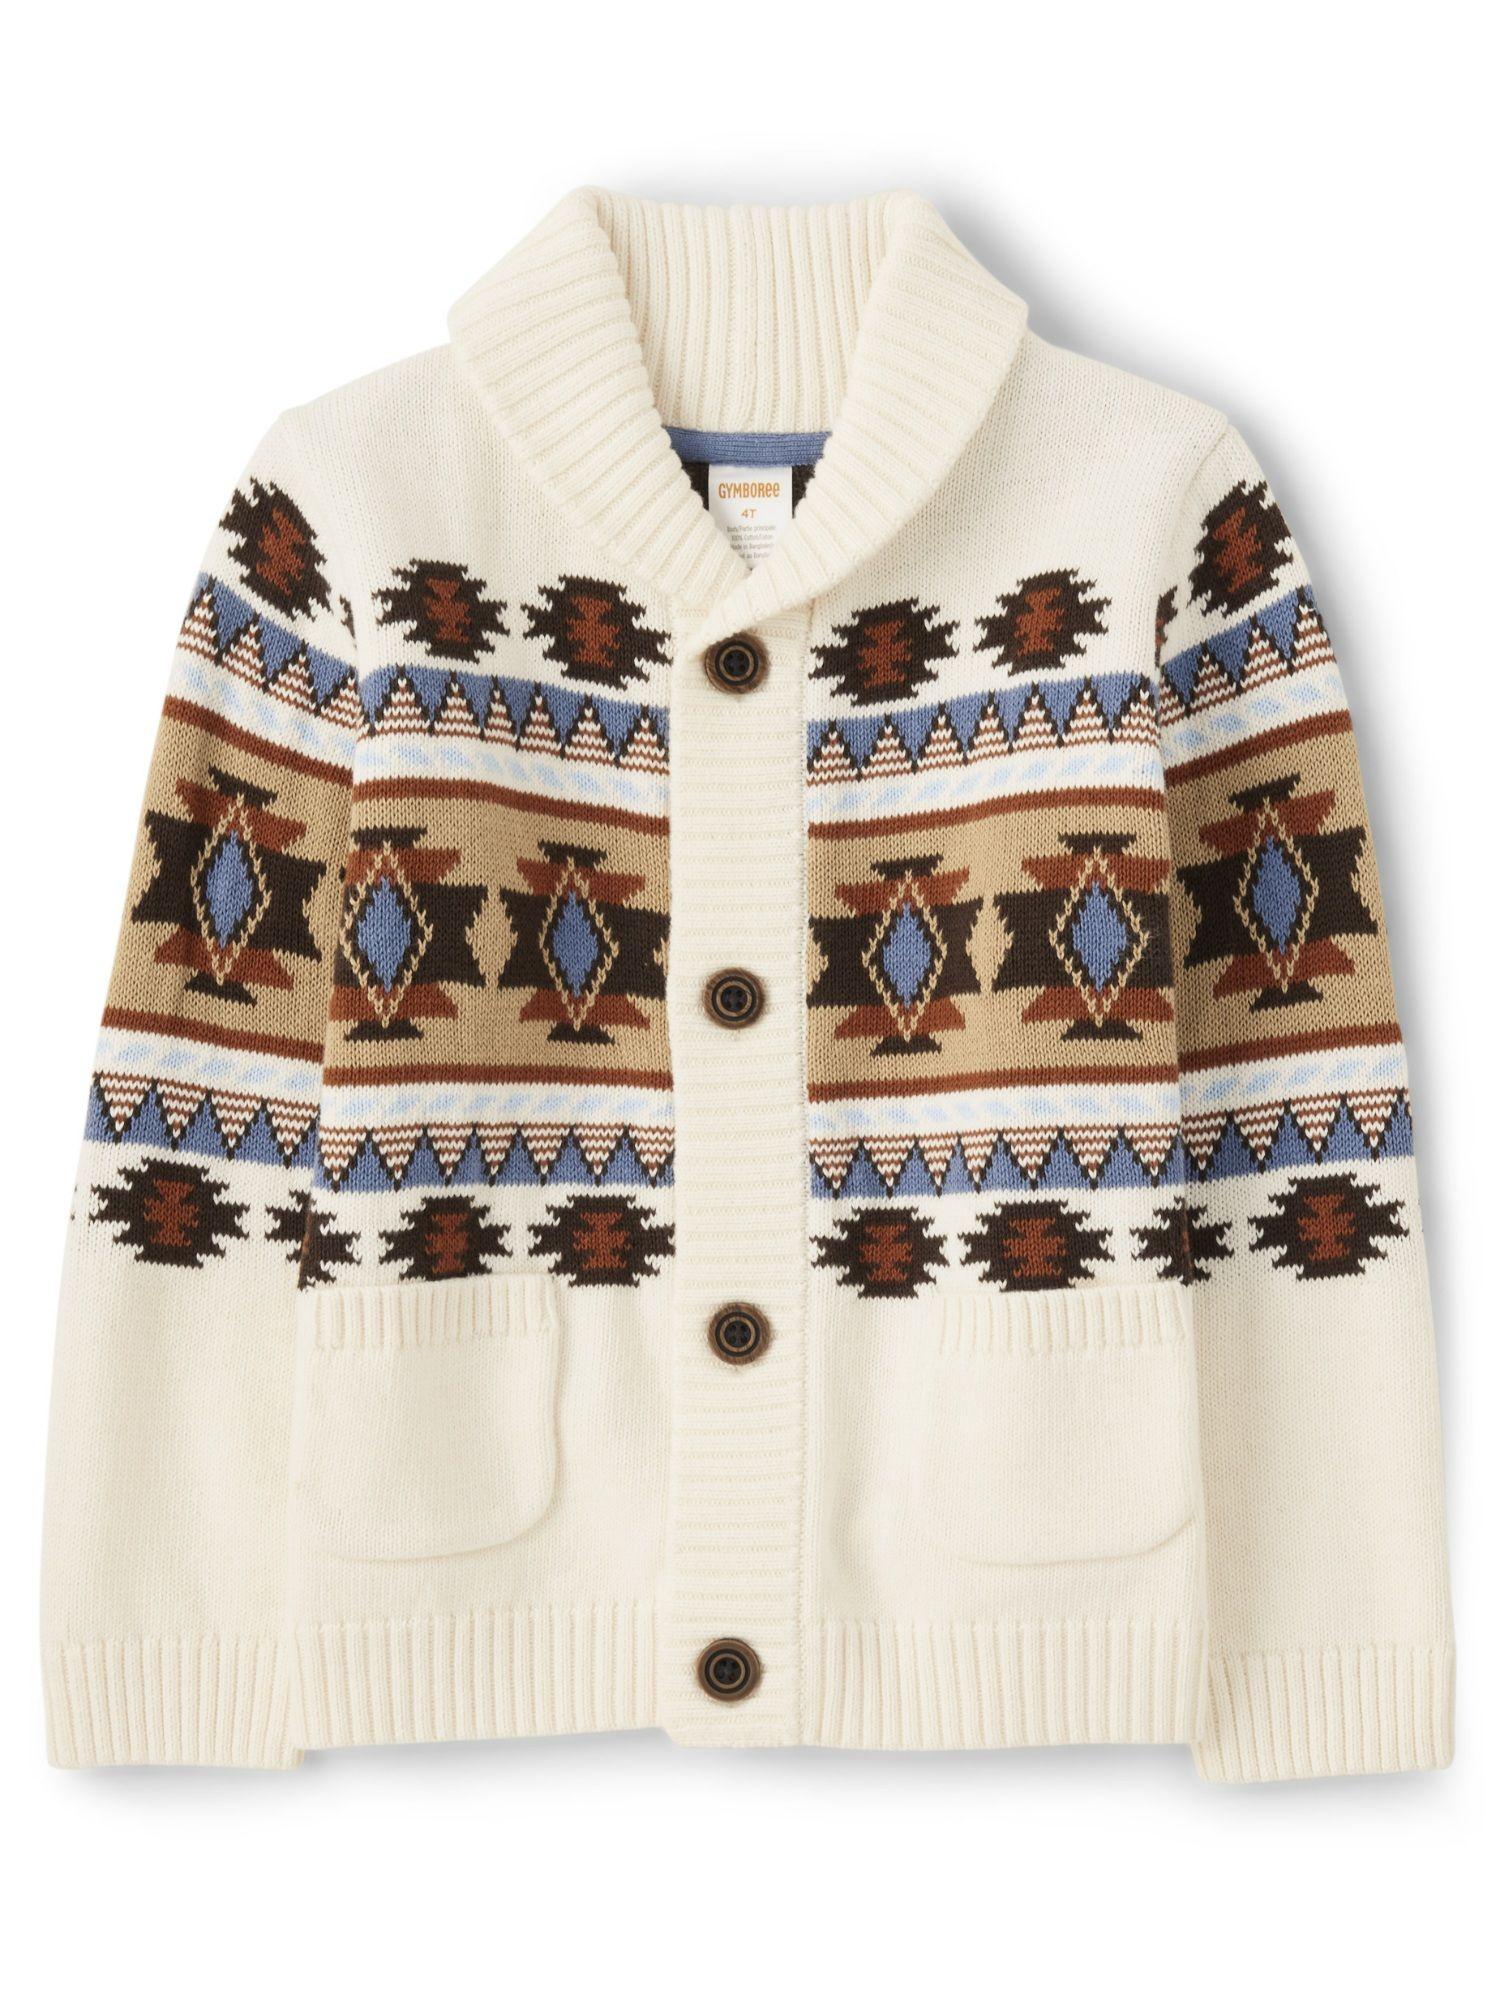 boys white & brown sweater with embroidered motifs (5-6 years)